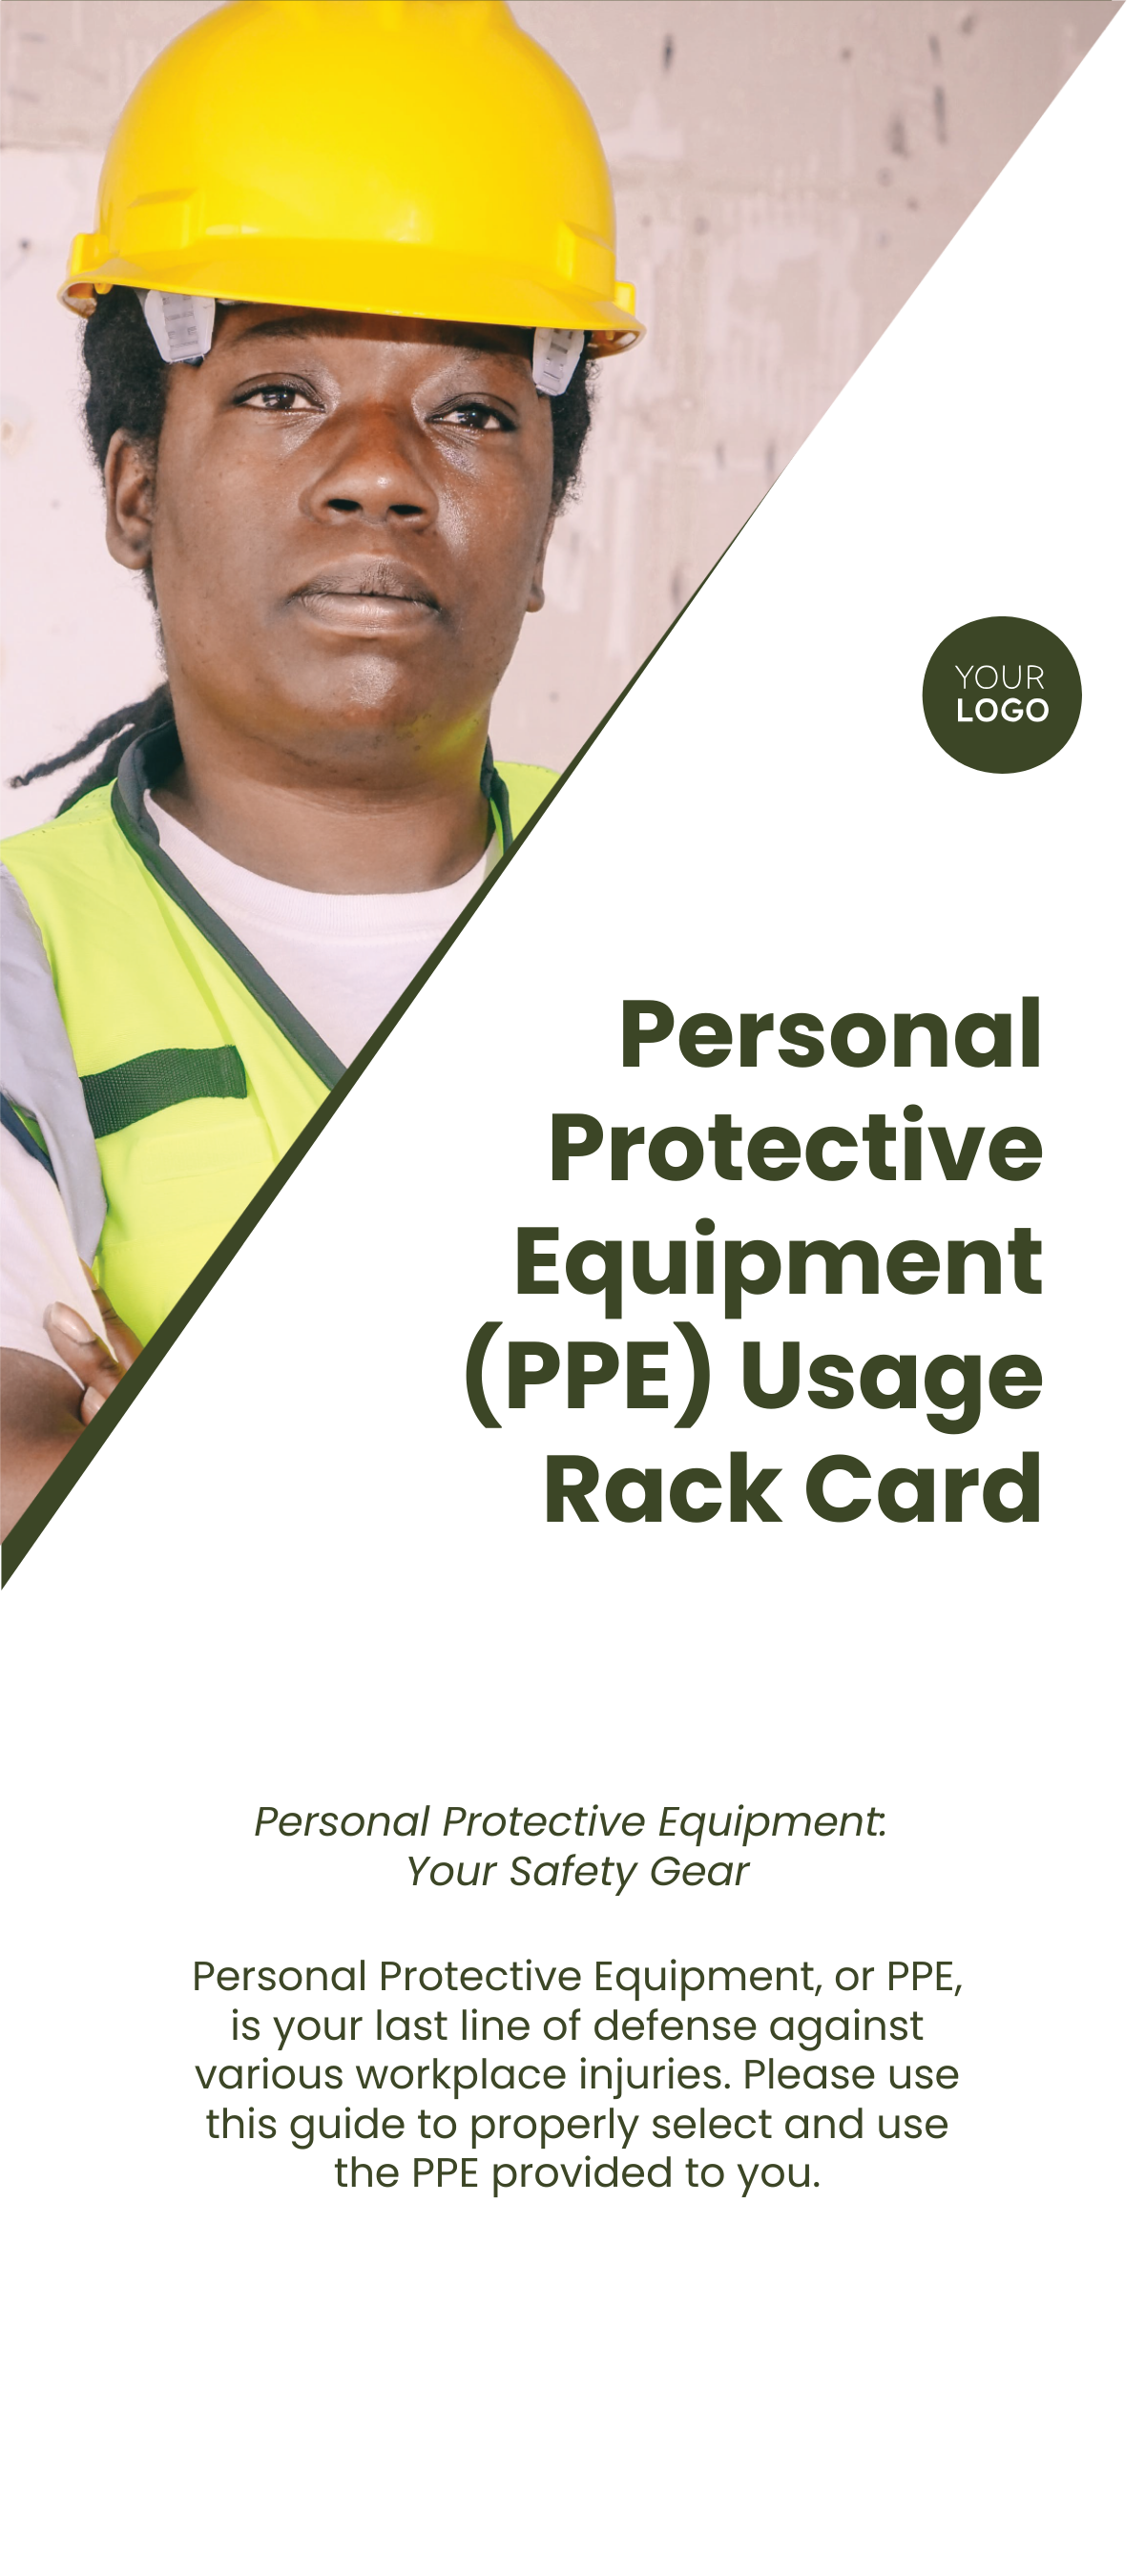 Personal Protective Equipment (PPE) Usage Rack Card Template